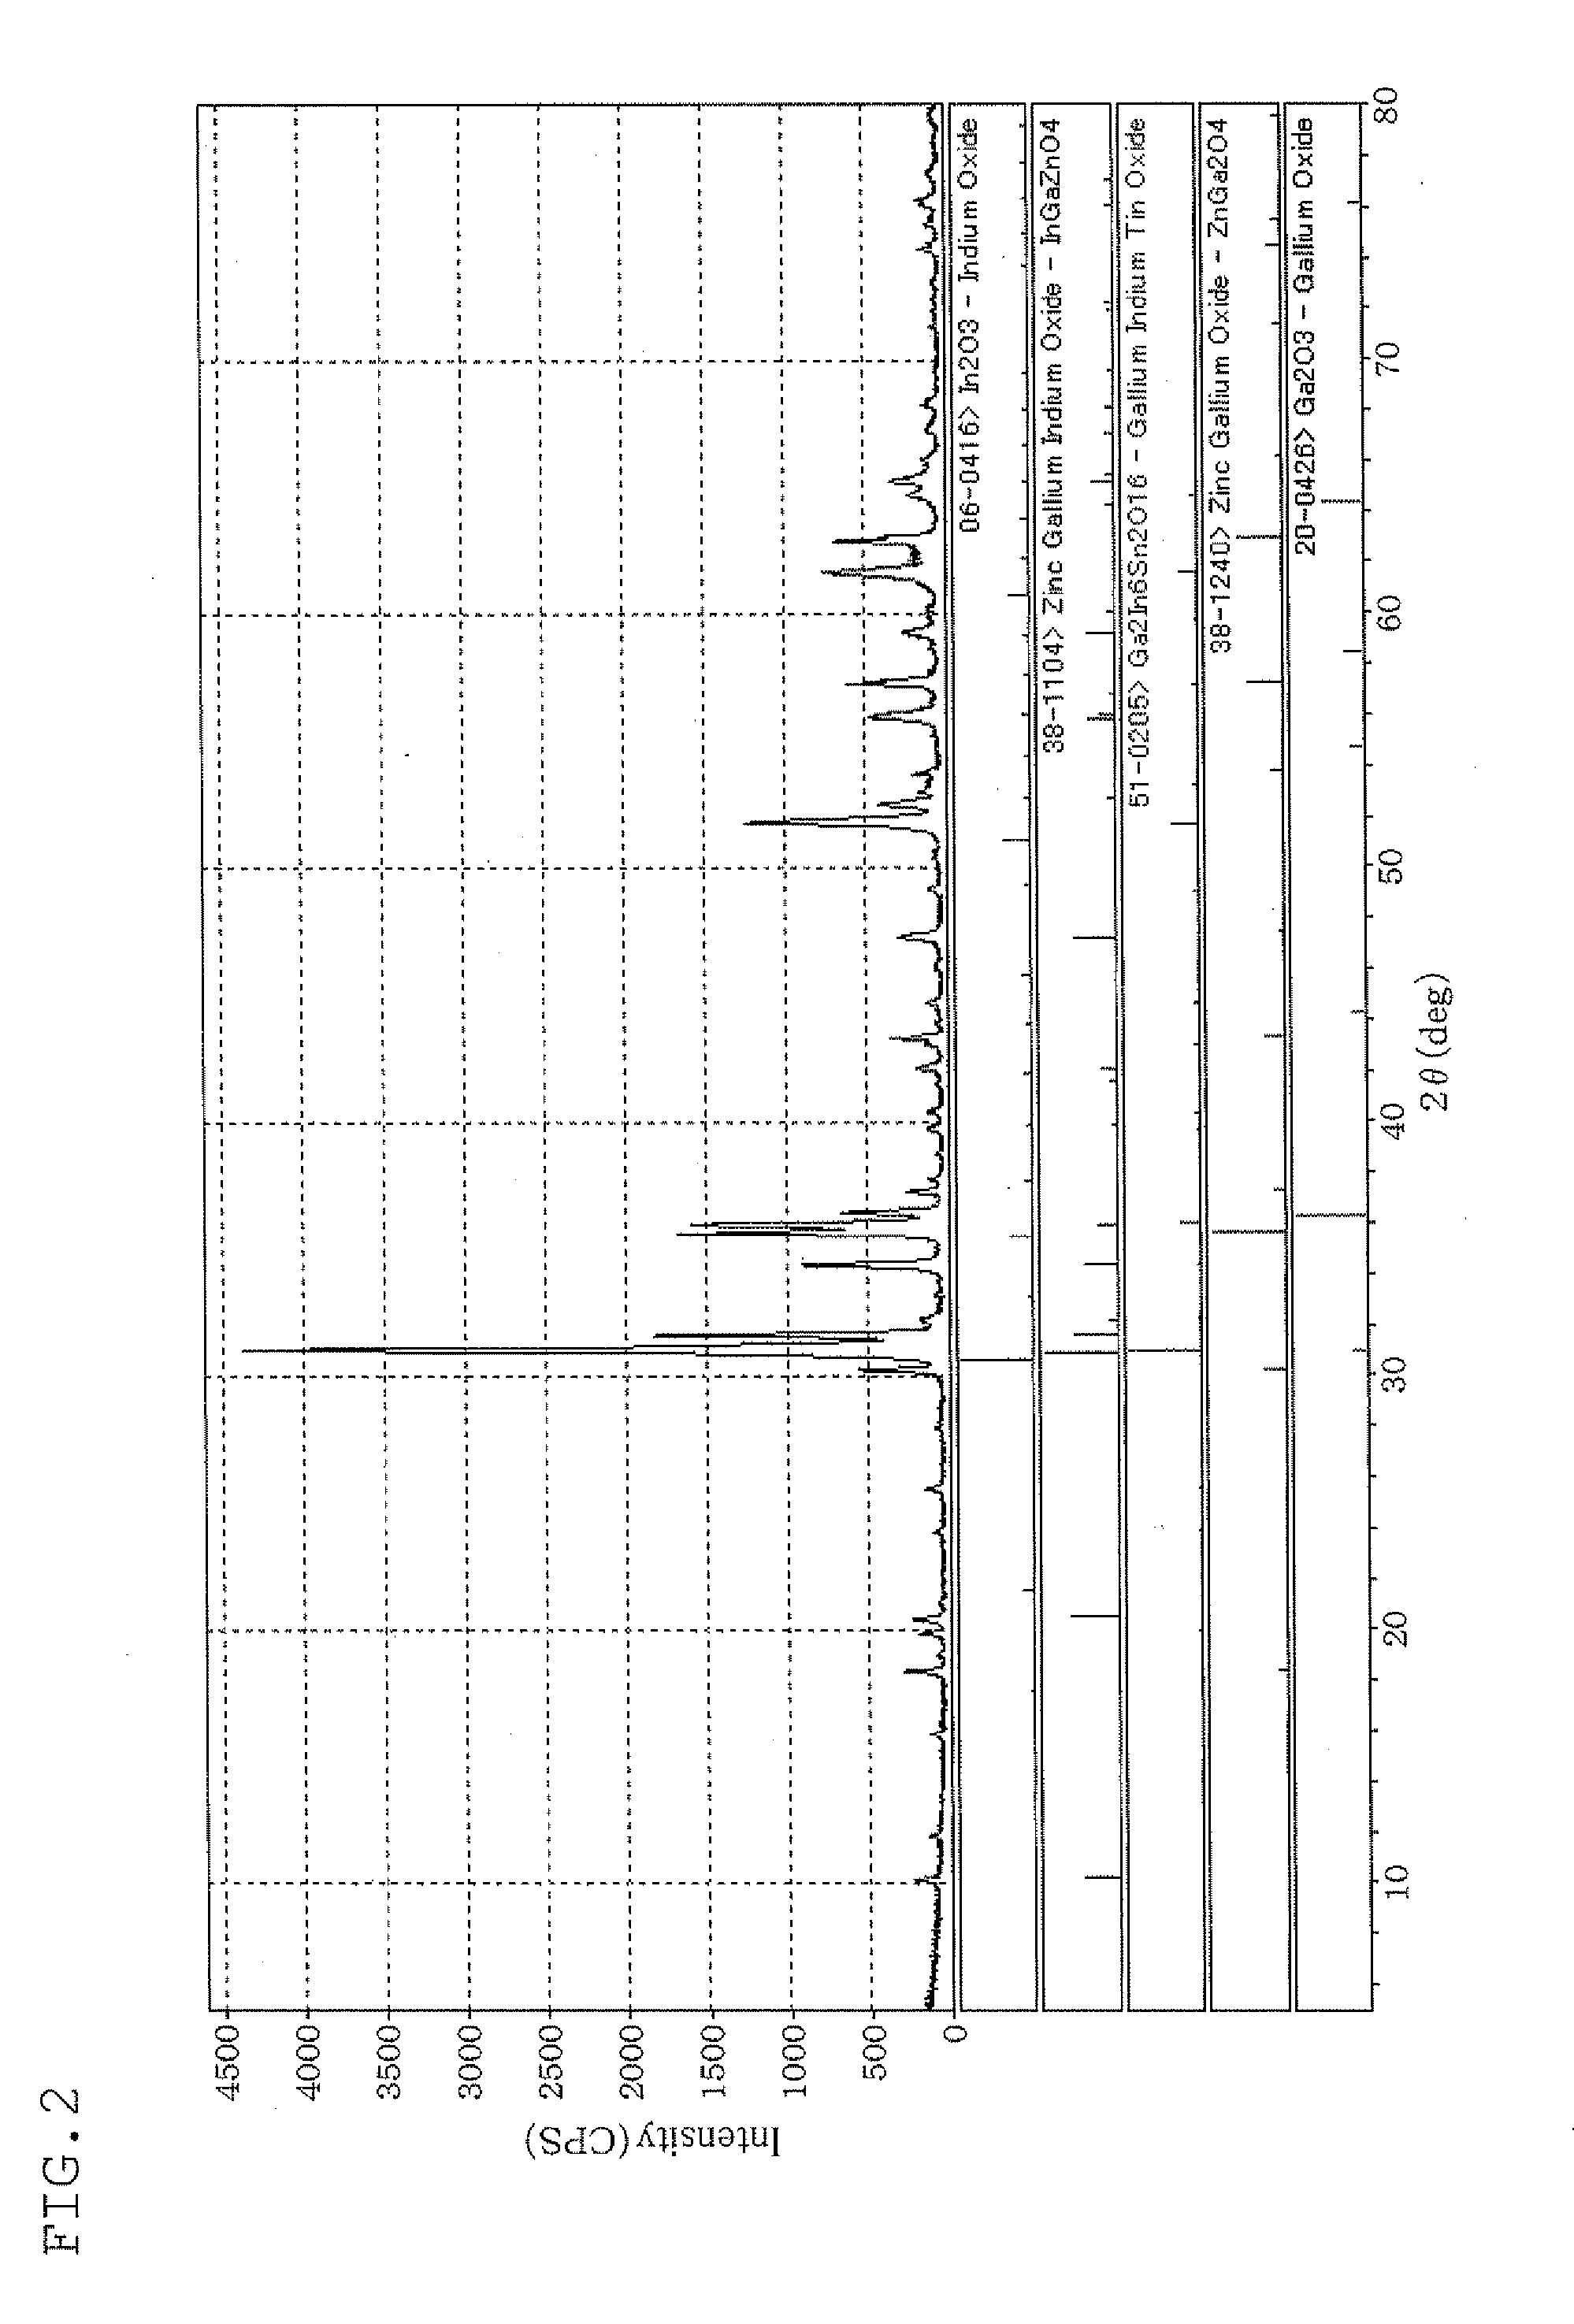 In-ga-zn-sn type oxide sinter and target for physical film deposition